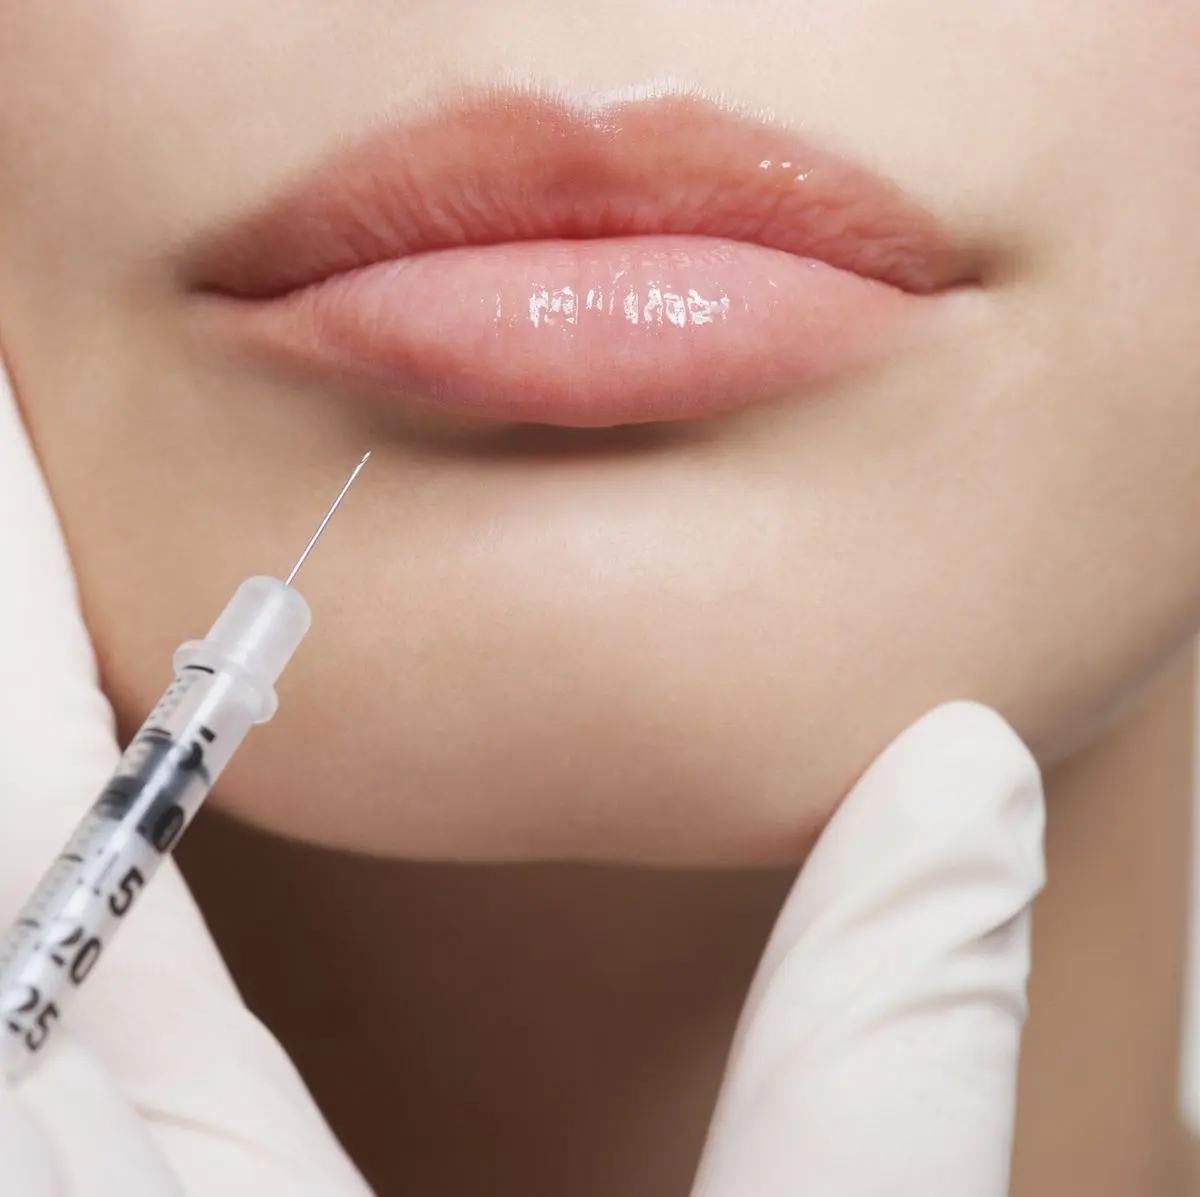 Dermal filler treatments available from Lashes, Brows & Aesthetics in Sutton Bridge